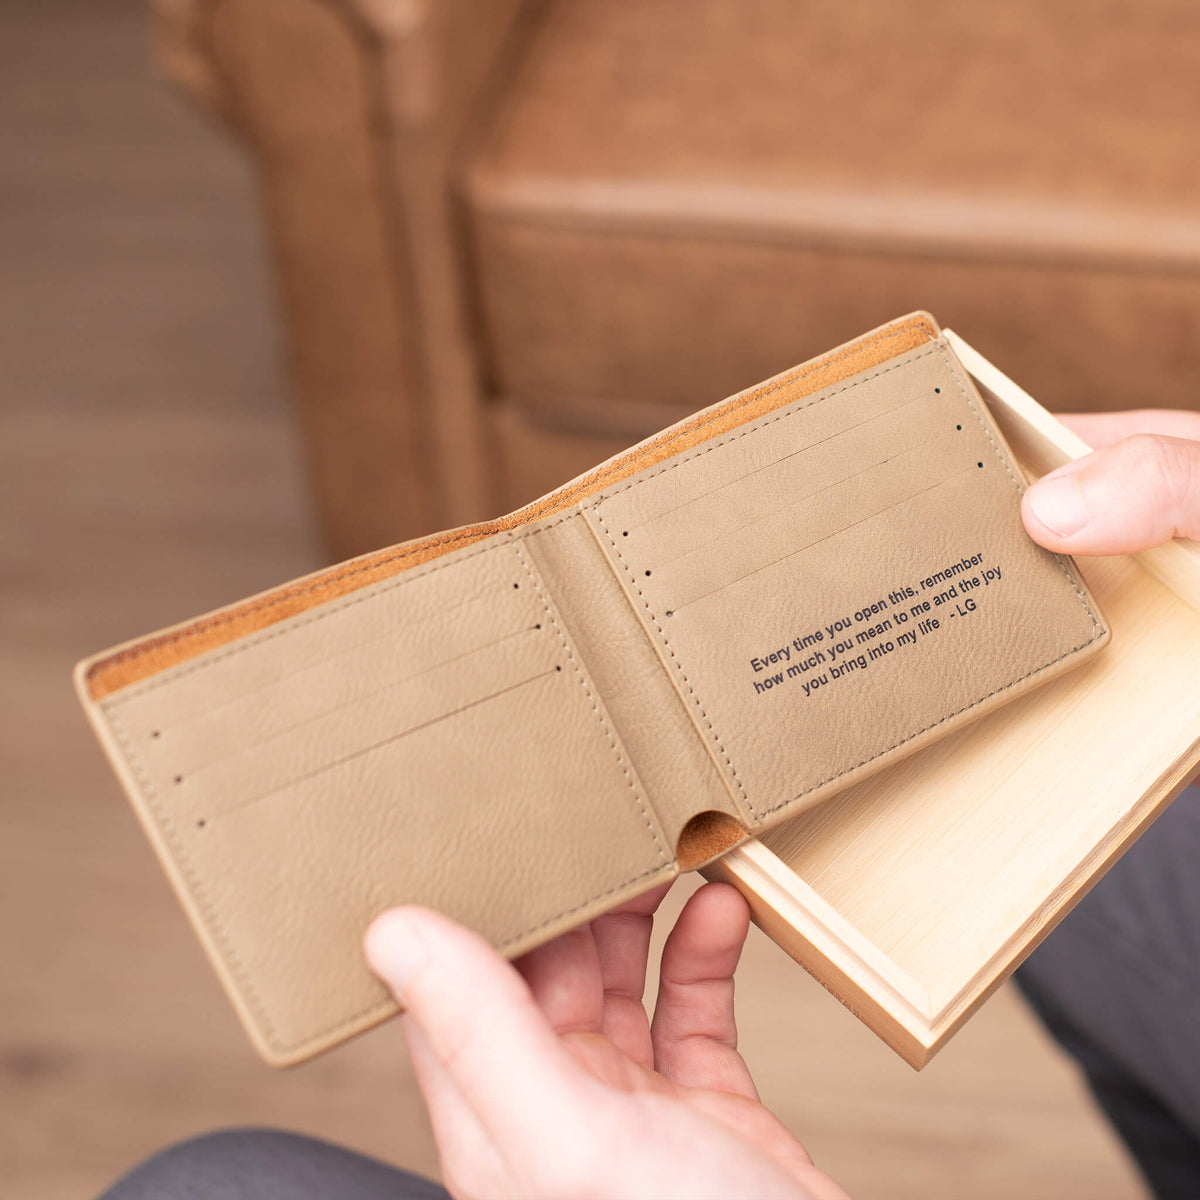 The Personalized Bifold Wallet